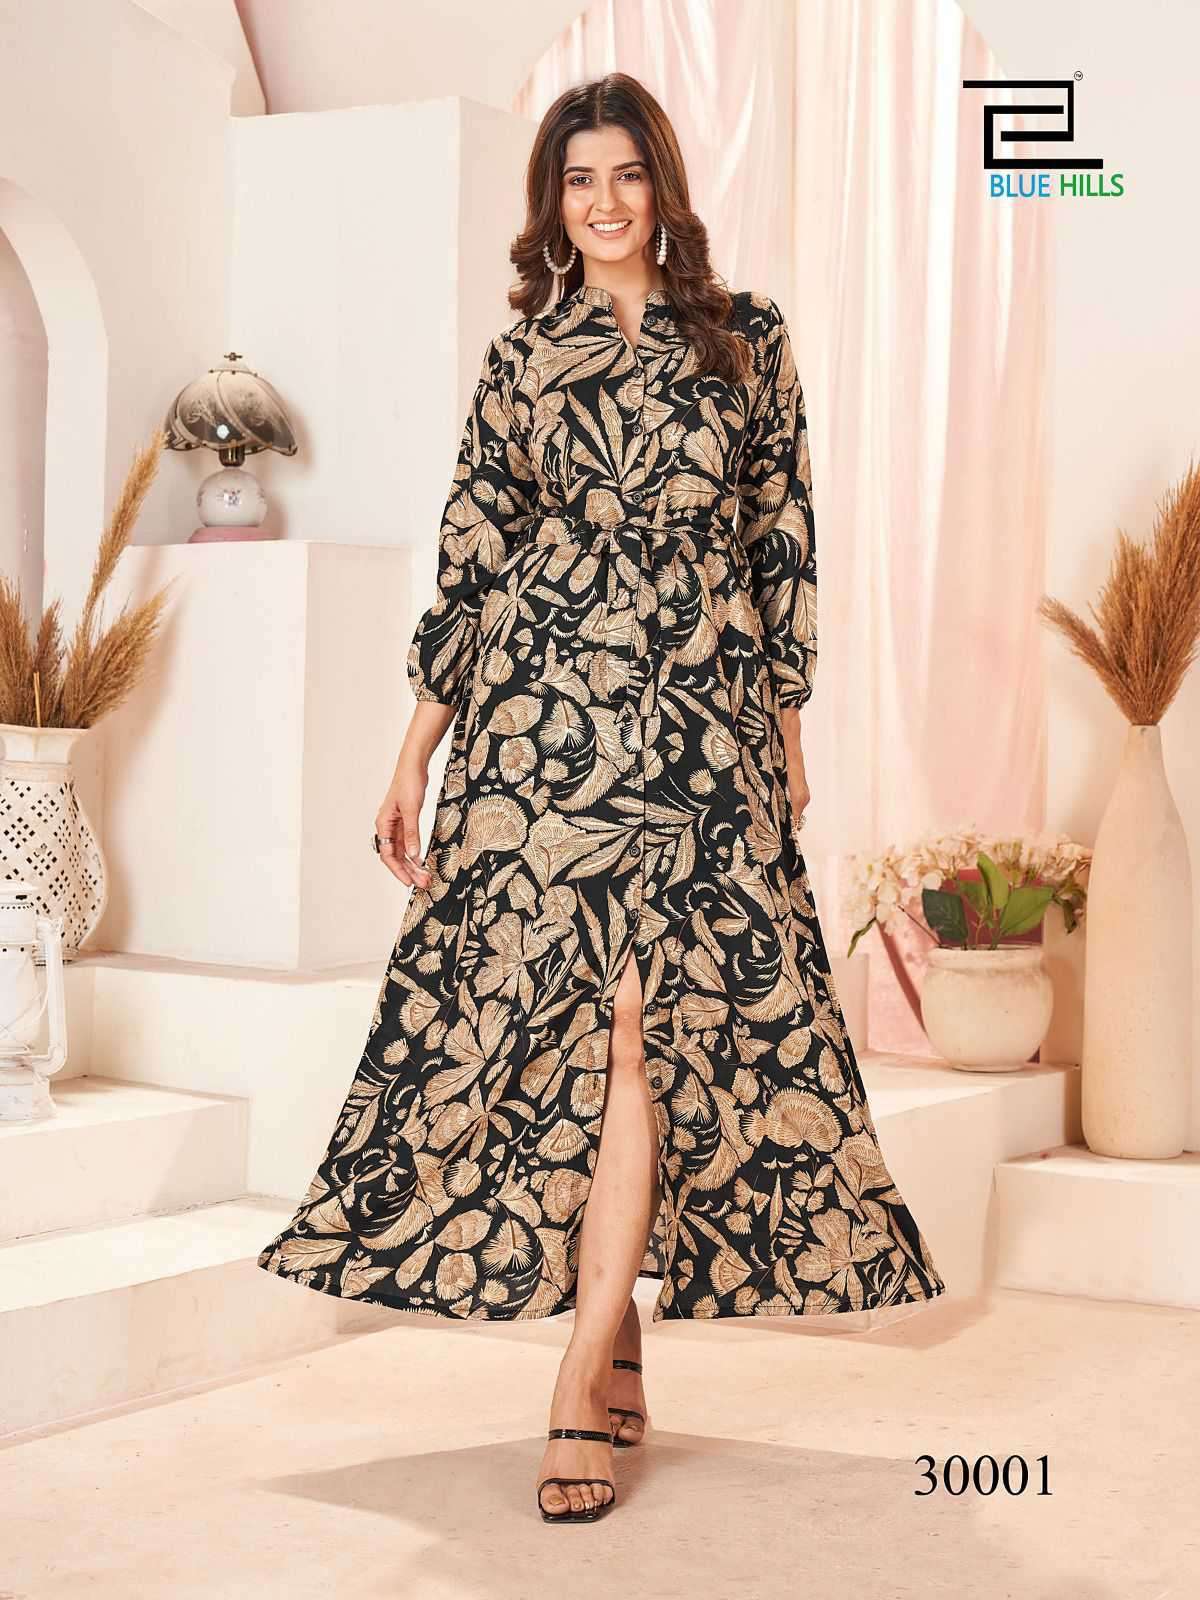 net gown designs latest western | Simple gown design, Gown dress party  wear, Gown dress design